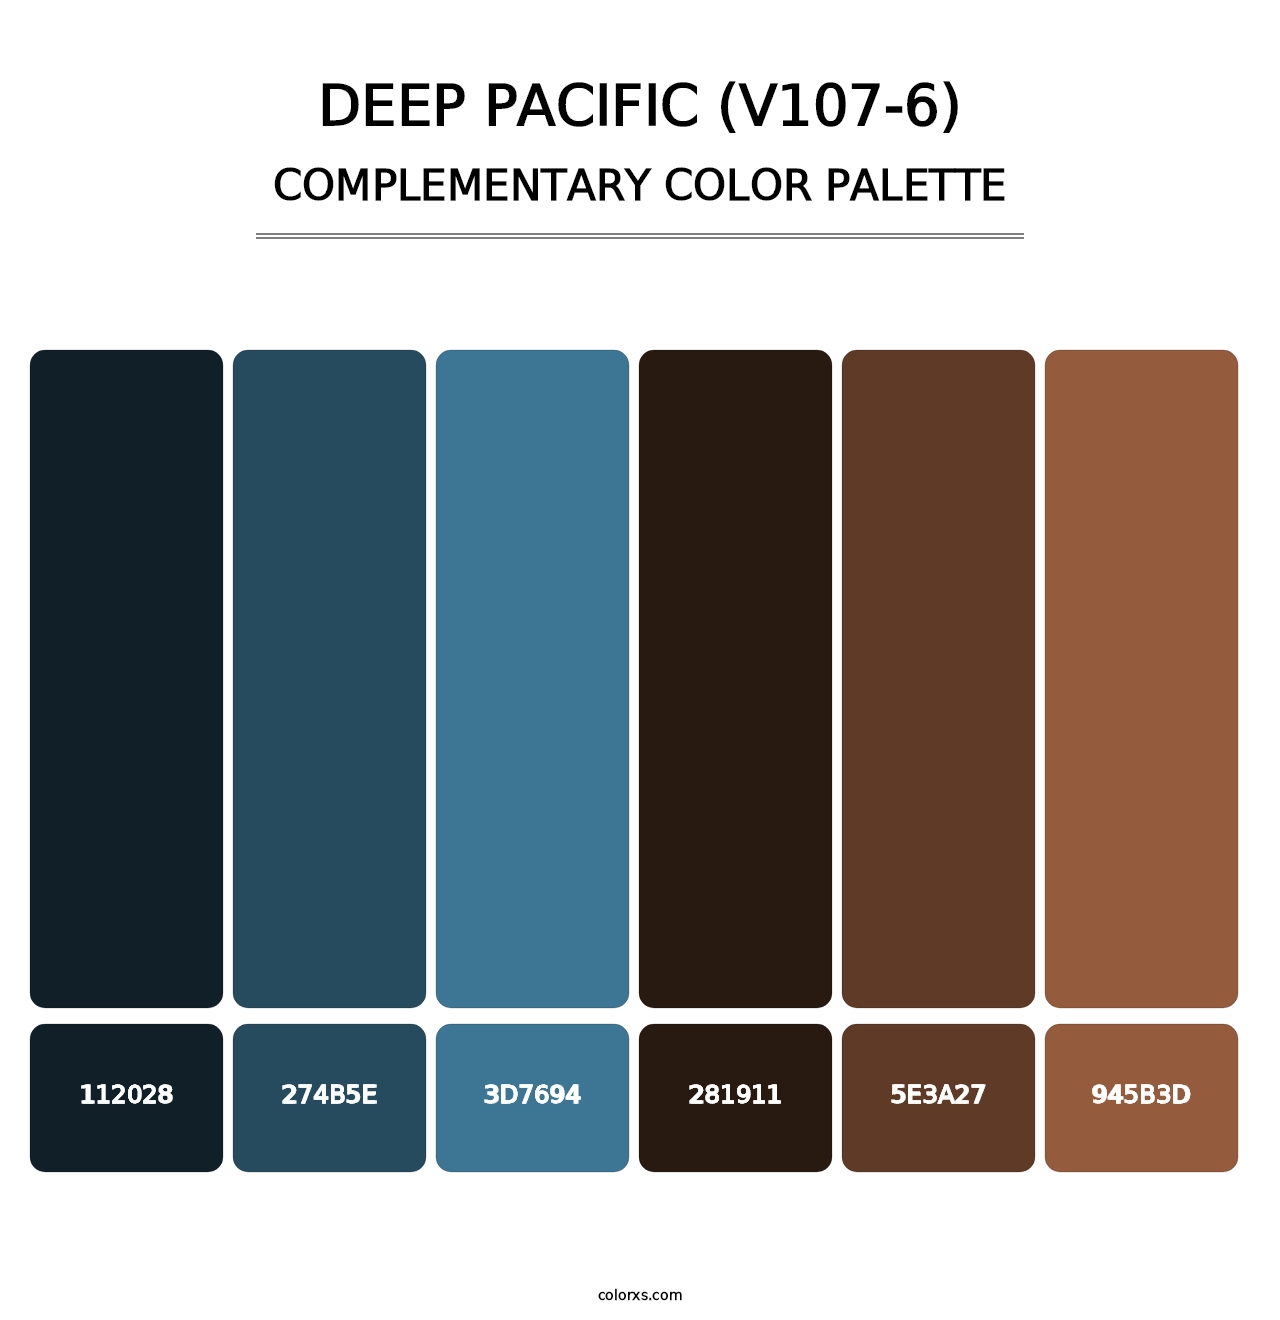 Deep Pacific (V107-6) - Complementary Color Palette